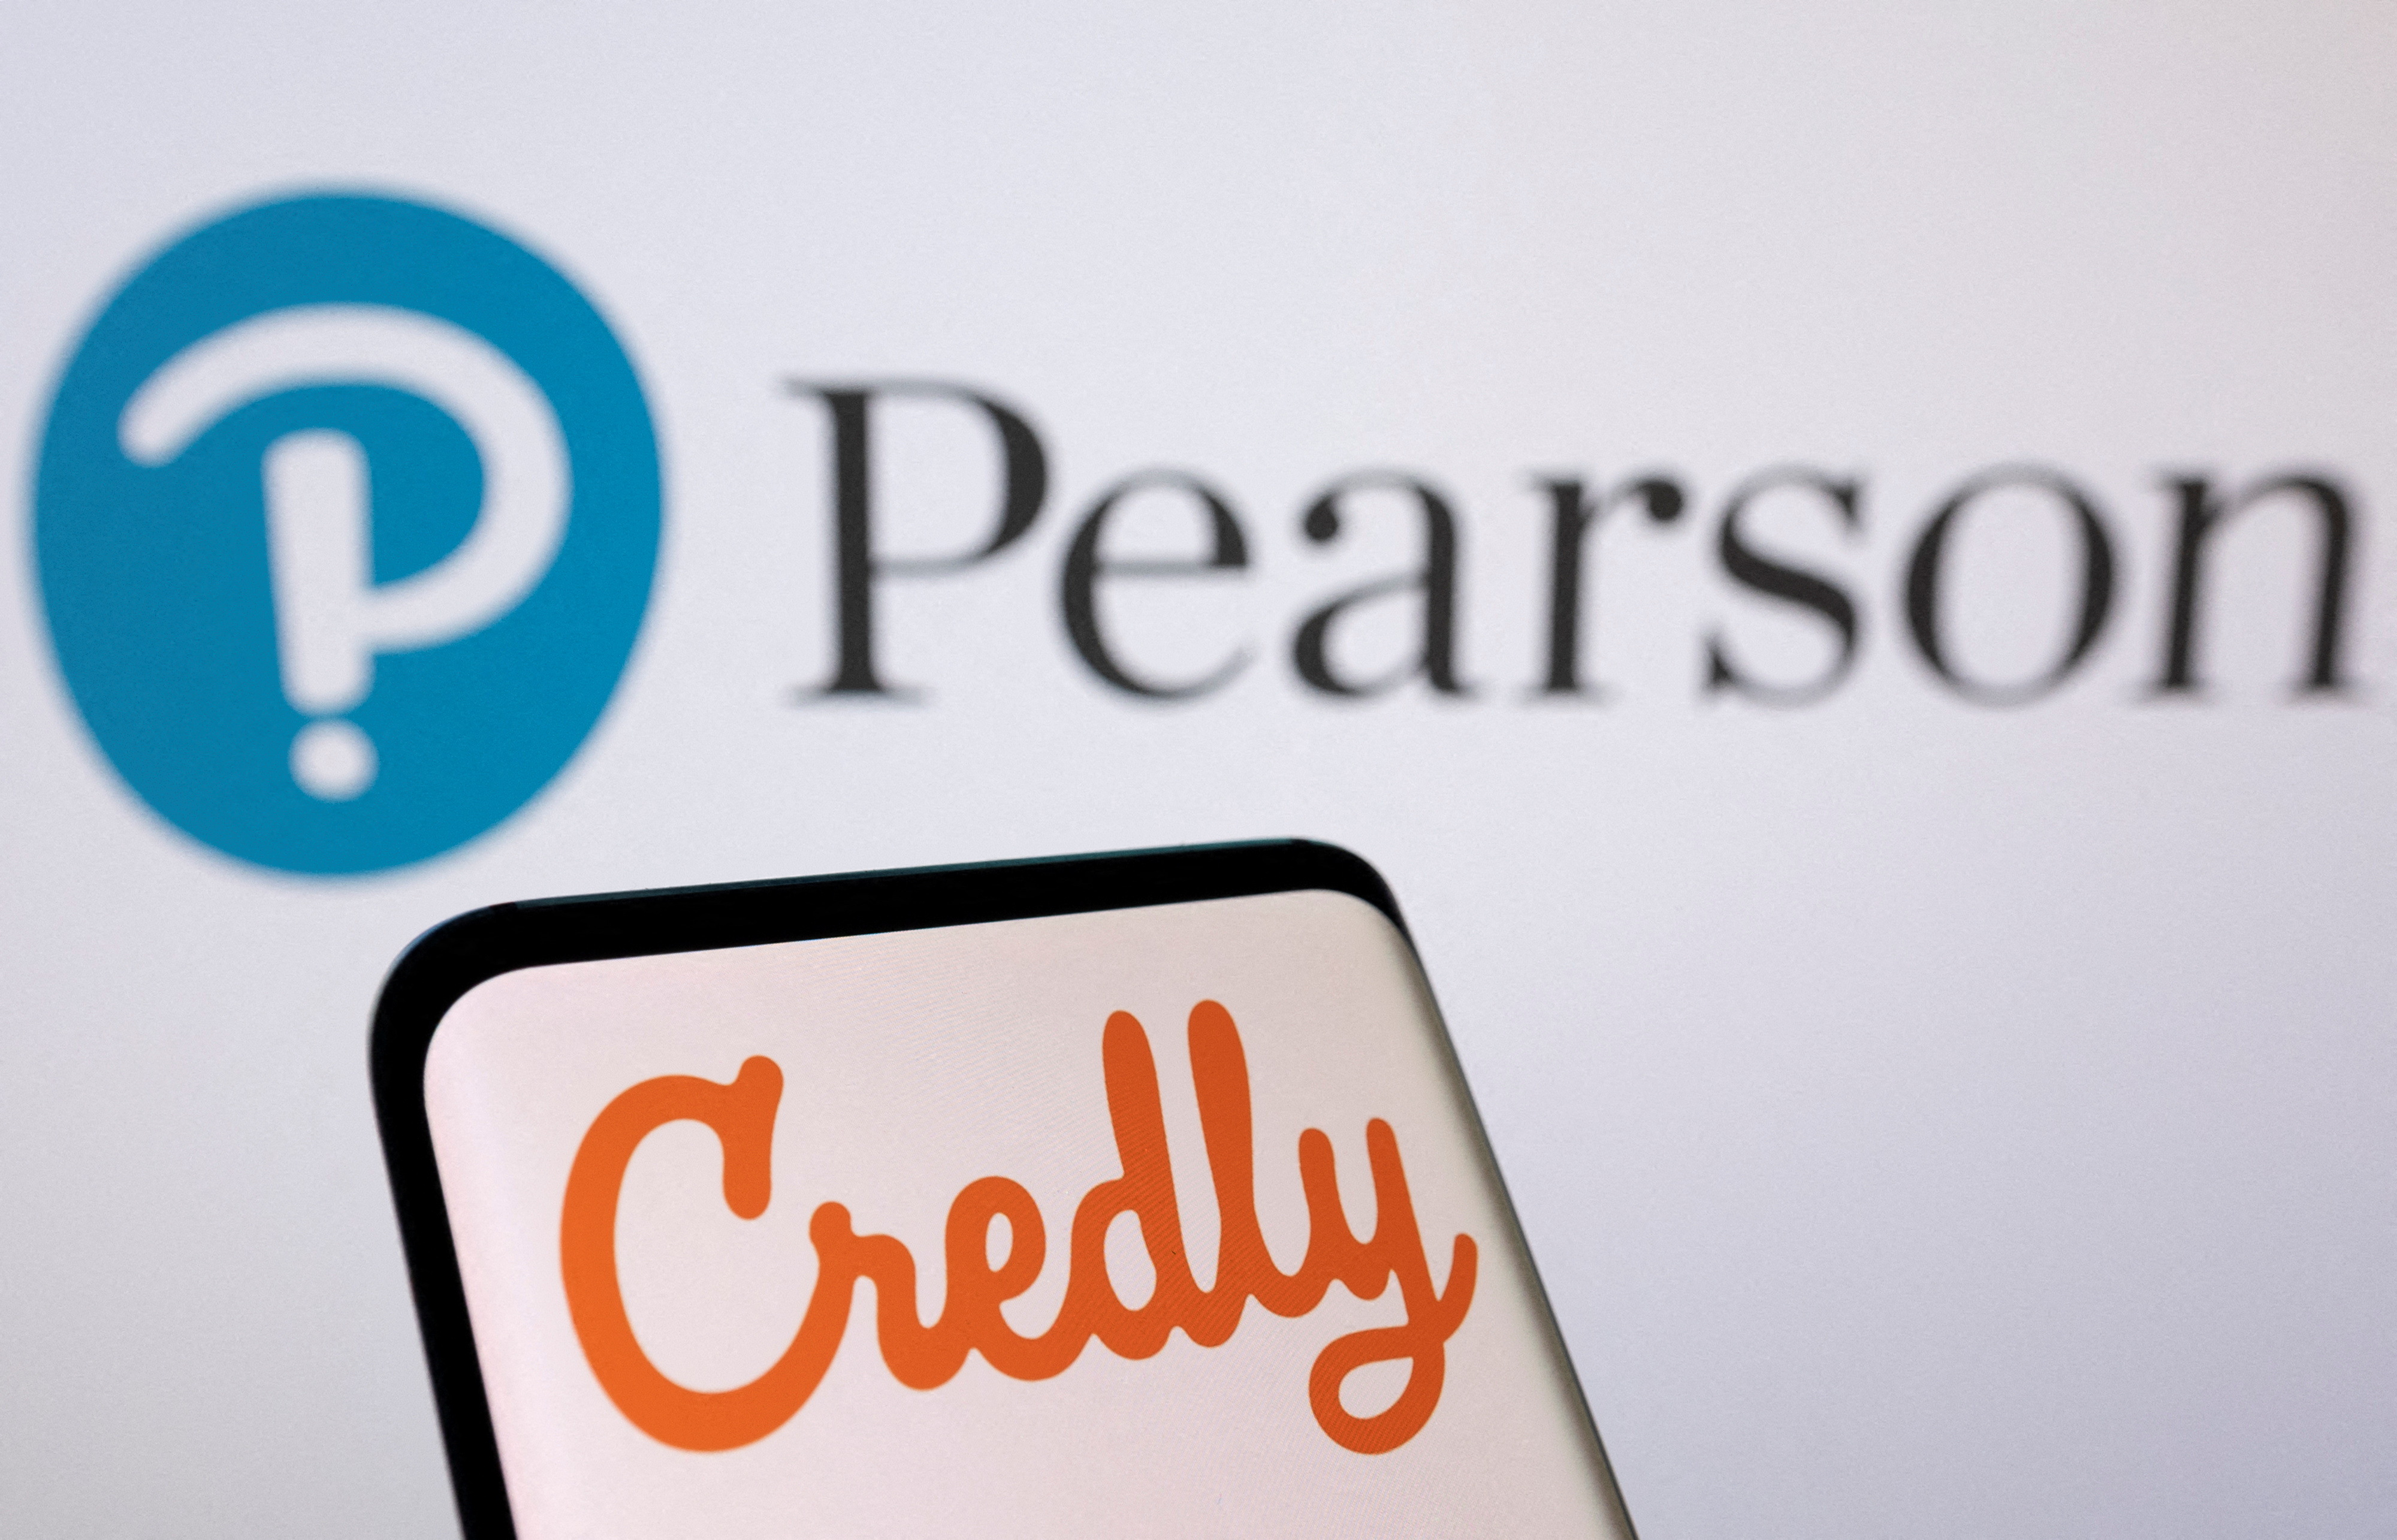 Illustration shows Pearson and Credly logos